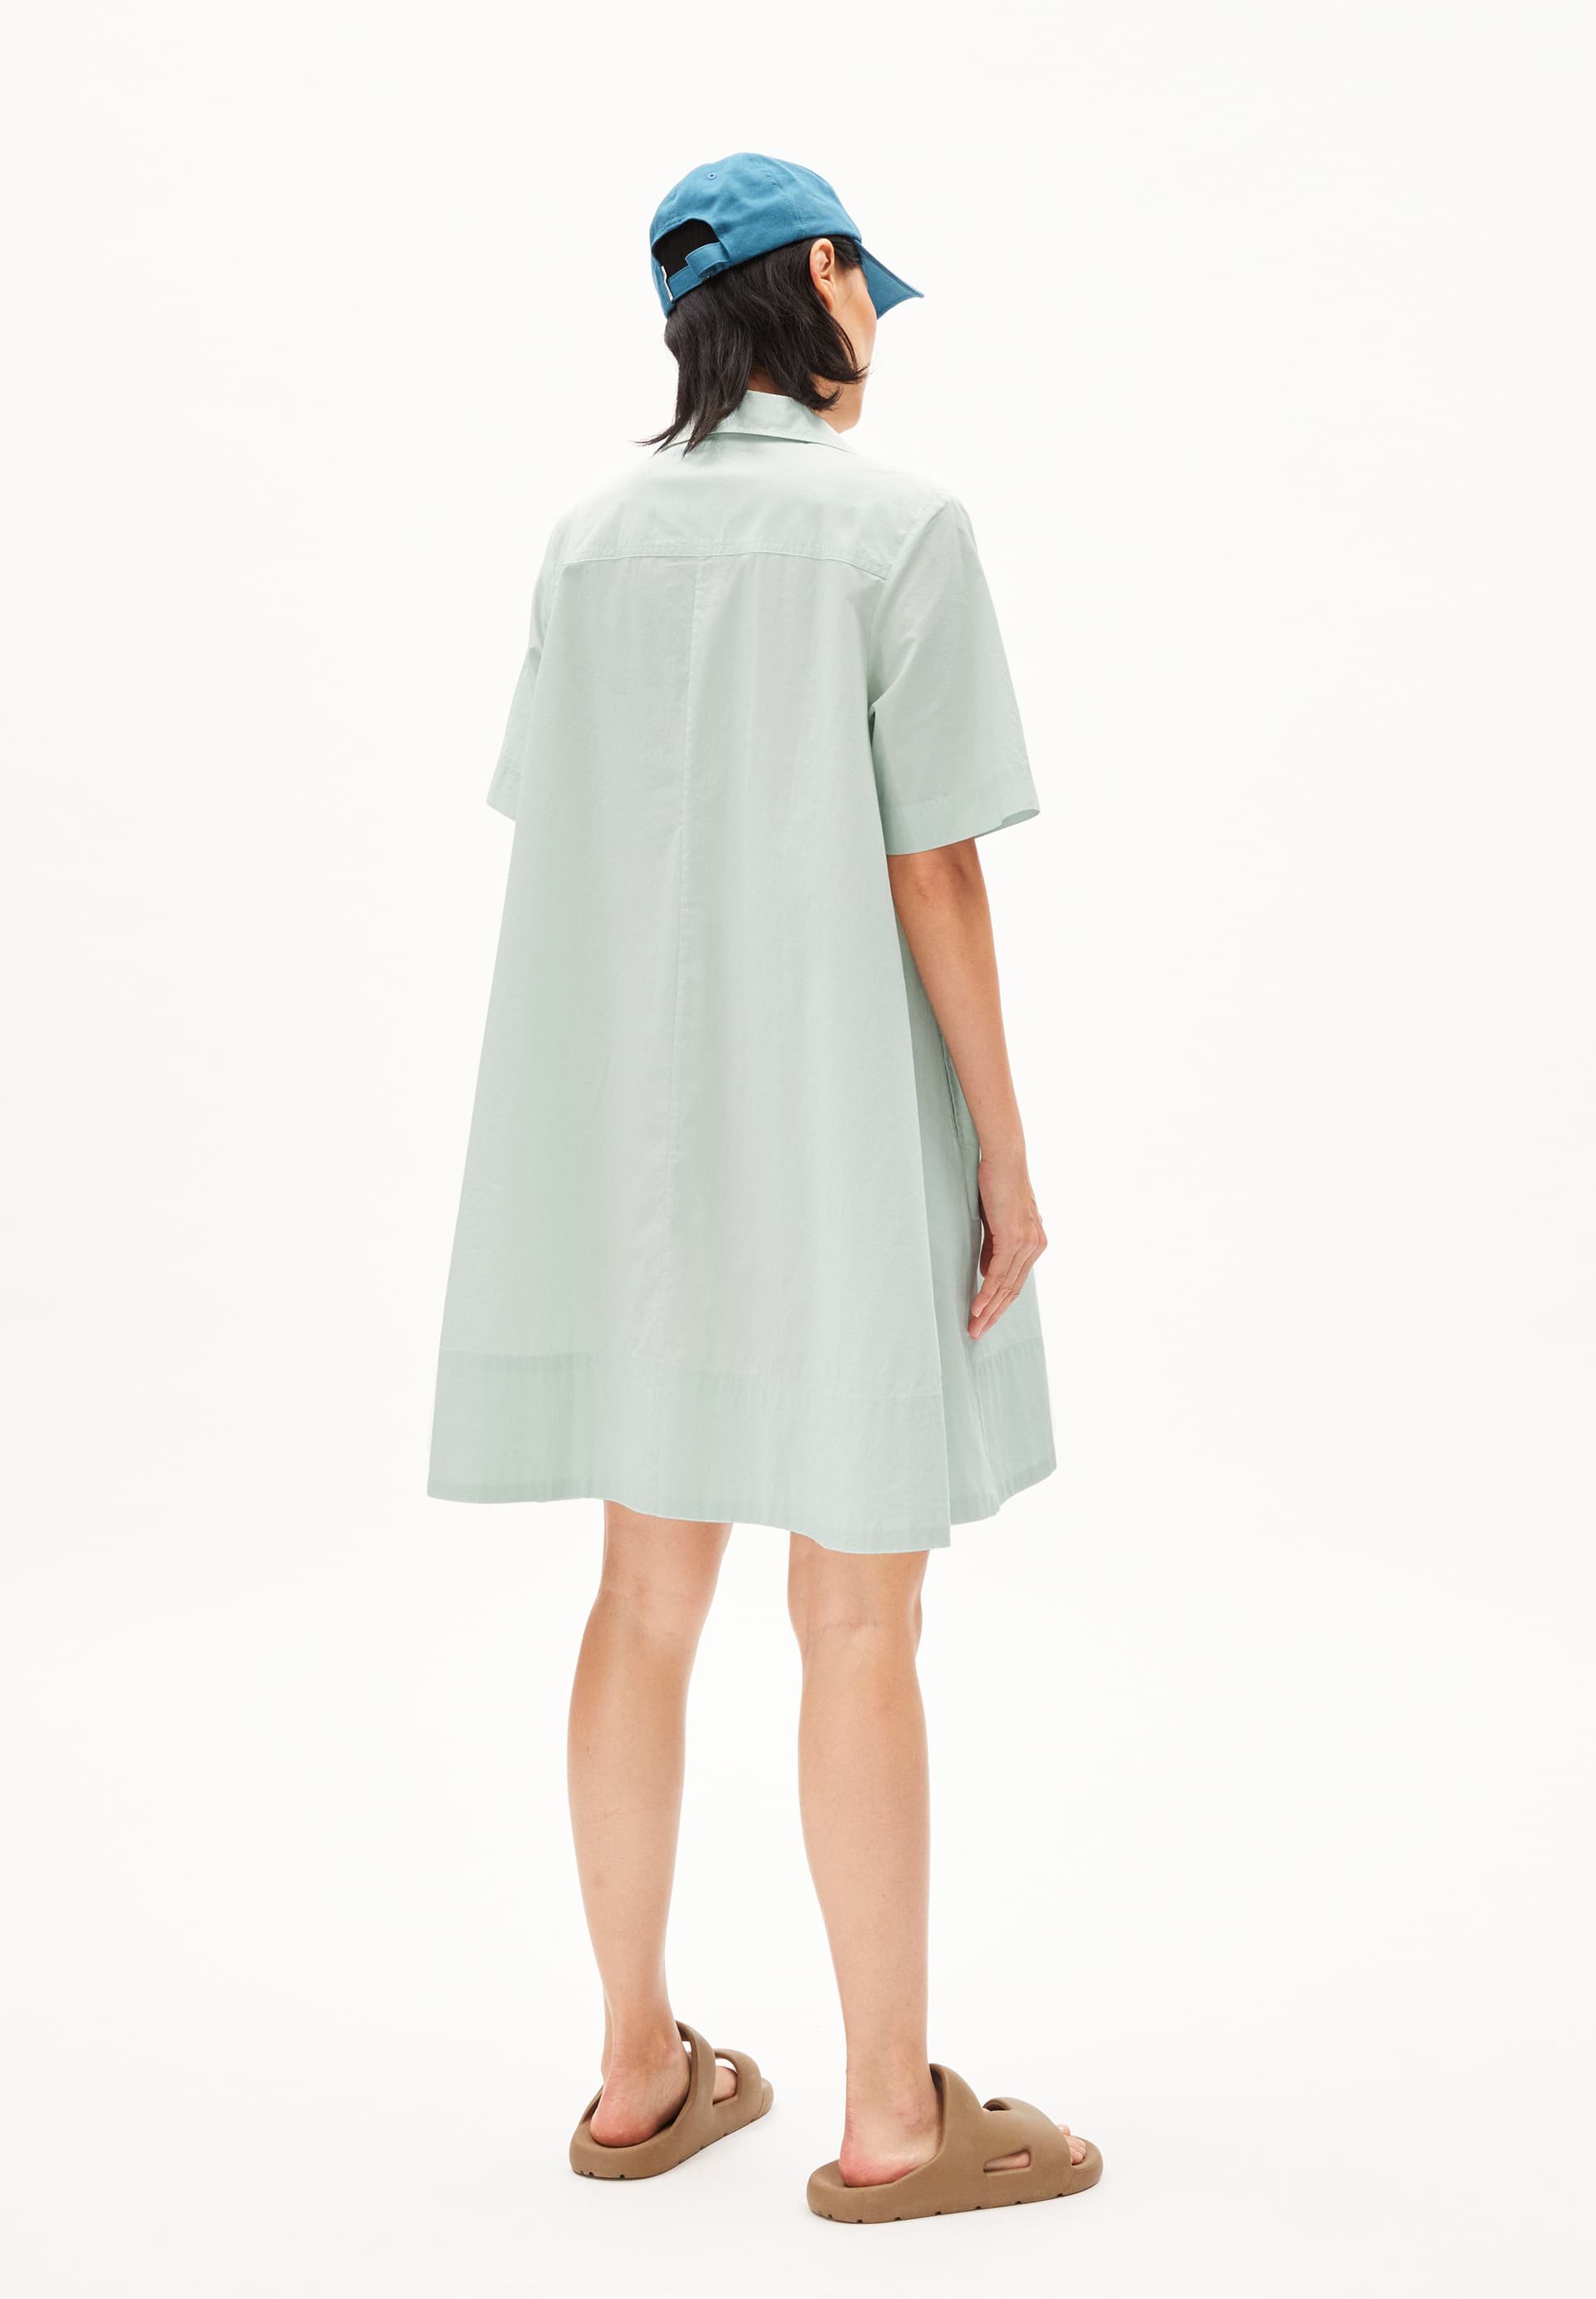 TALIZAA Woven Dress Relaxed Fit made of Organic Cotton